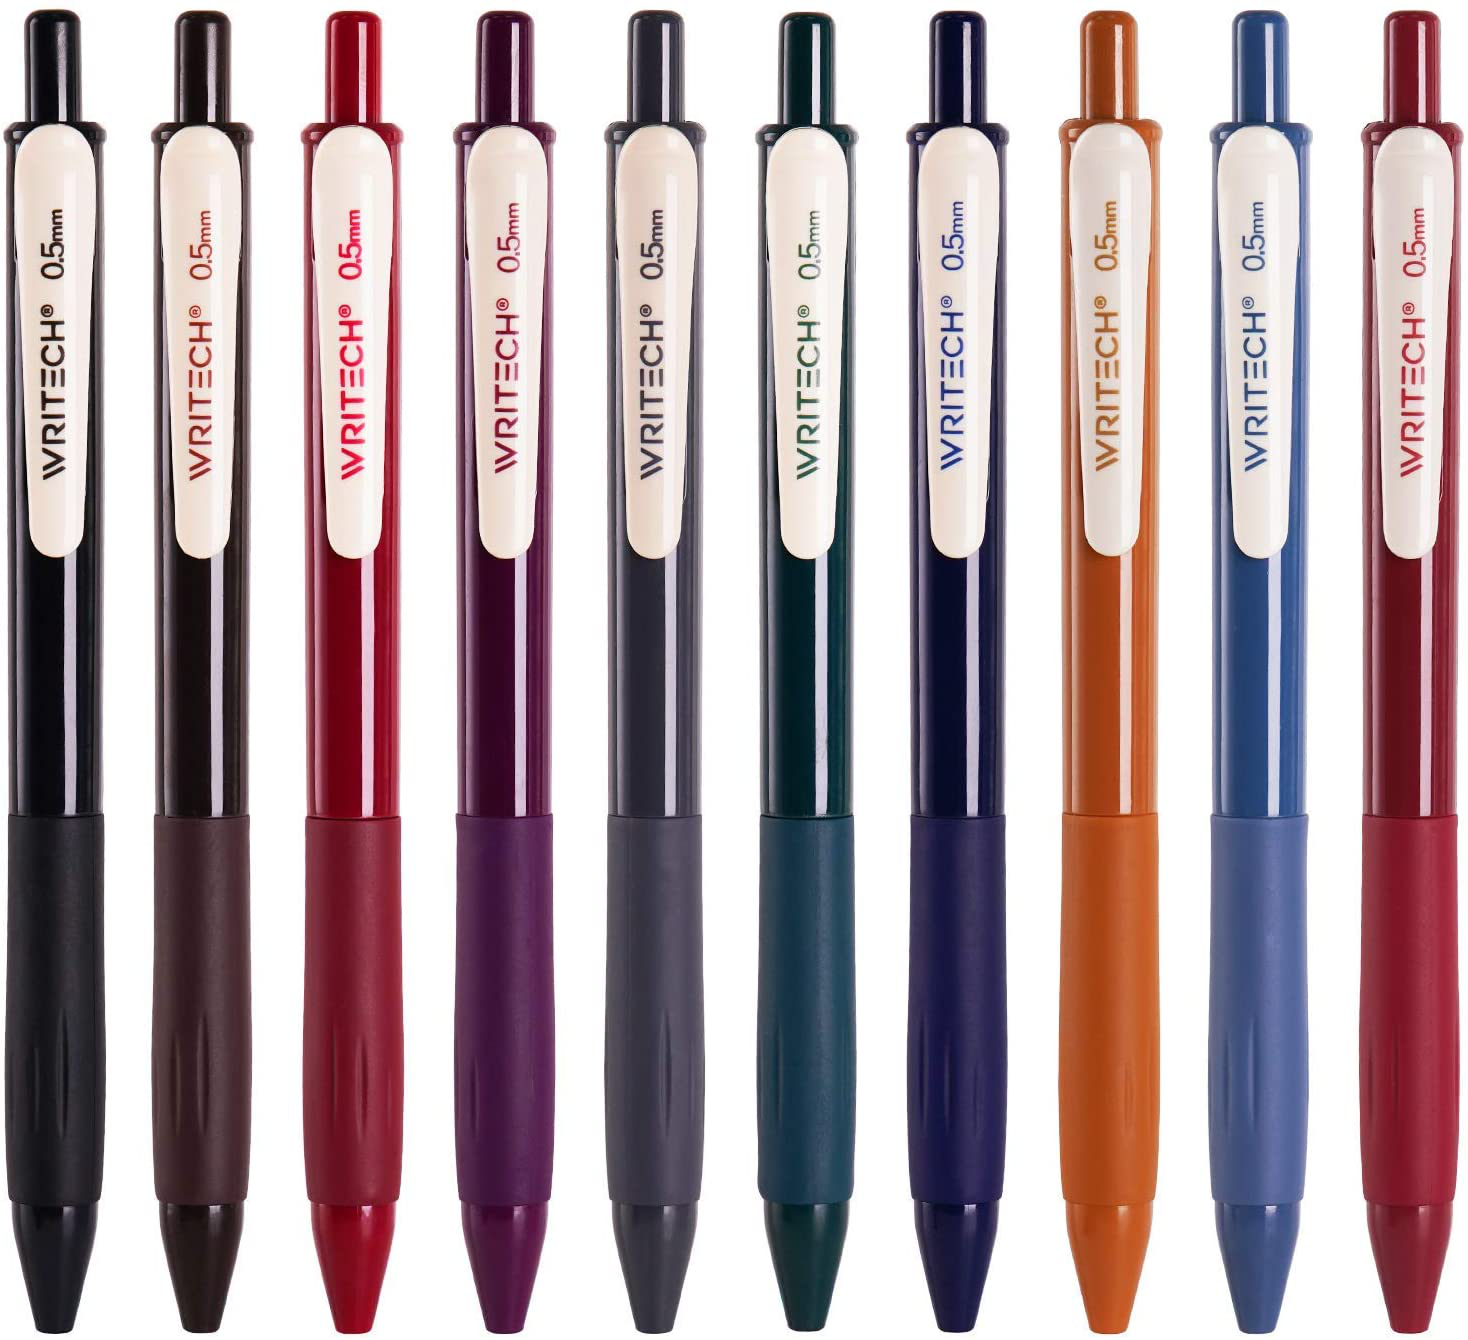 Writech Retractable Gel Pens Quick Dry Ink Pens Fine Point 0.5mm 10 Assorted Unique Vintage Colors For Journaling, Drawing, Doodling, and Notetaking (Vintage 2)